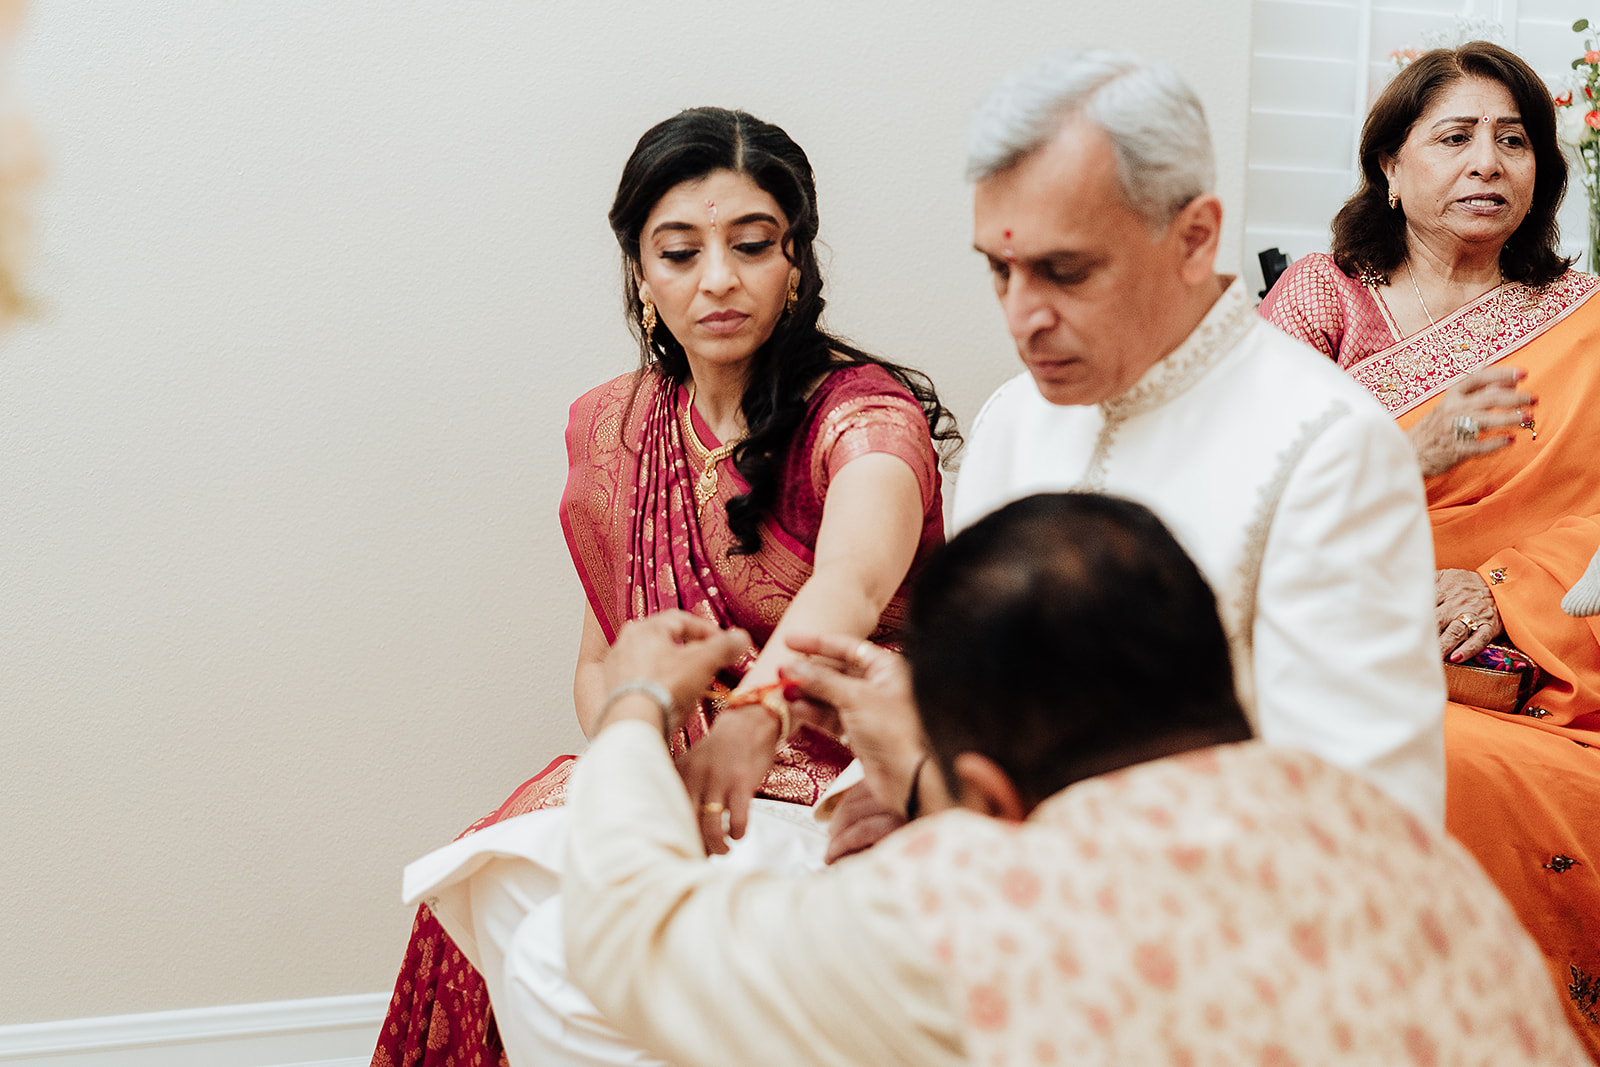 Indian wedding in Orange County California mother and father of the groom perform traditional wedding rituals